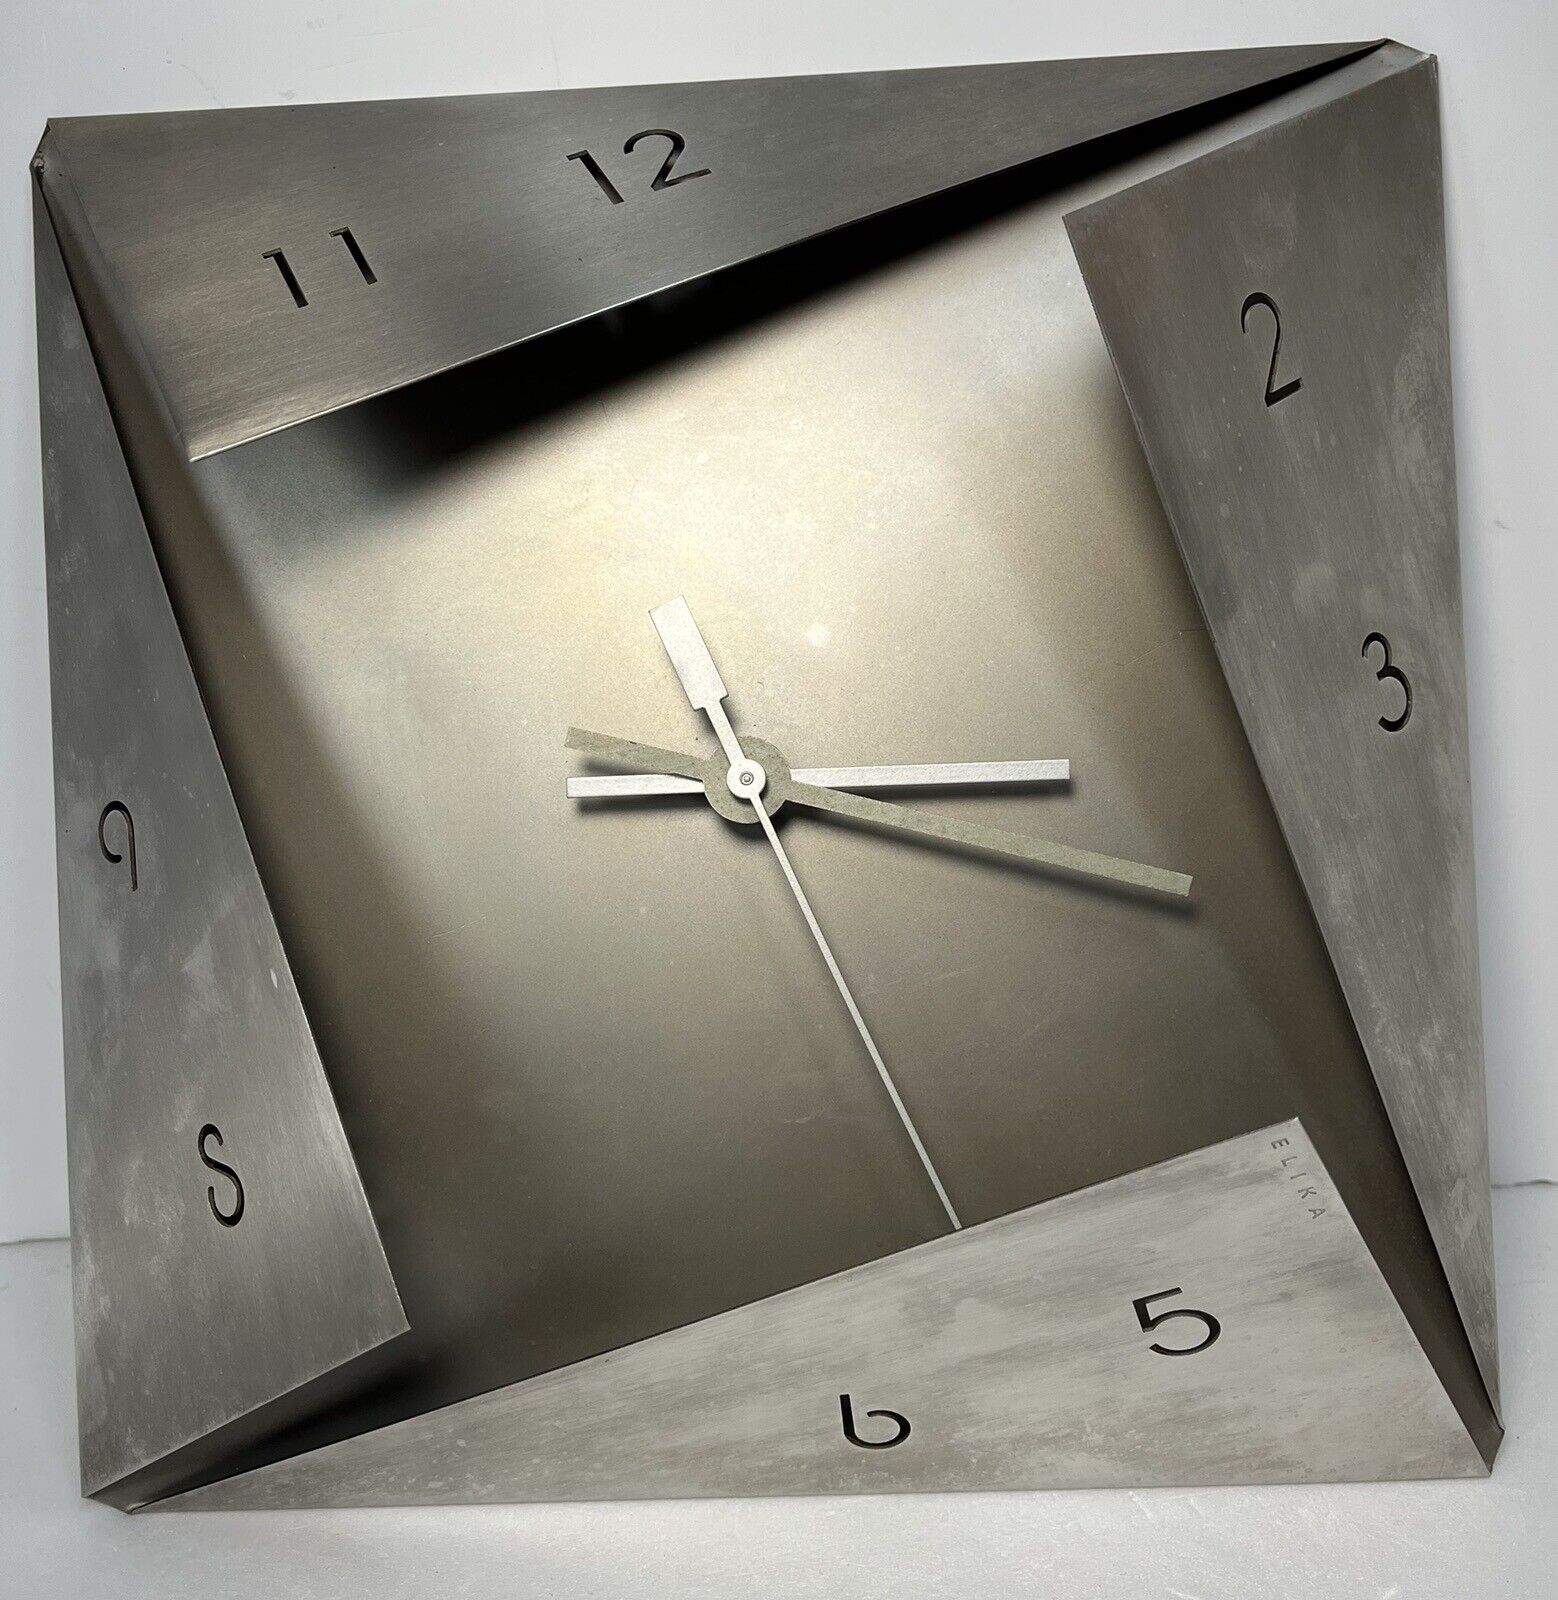 Laborious Wall Clock Constantin Boym for Elika Stainless Steel Petal ca. 1989